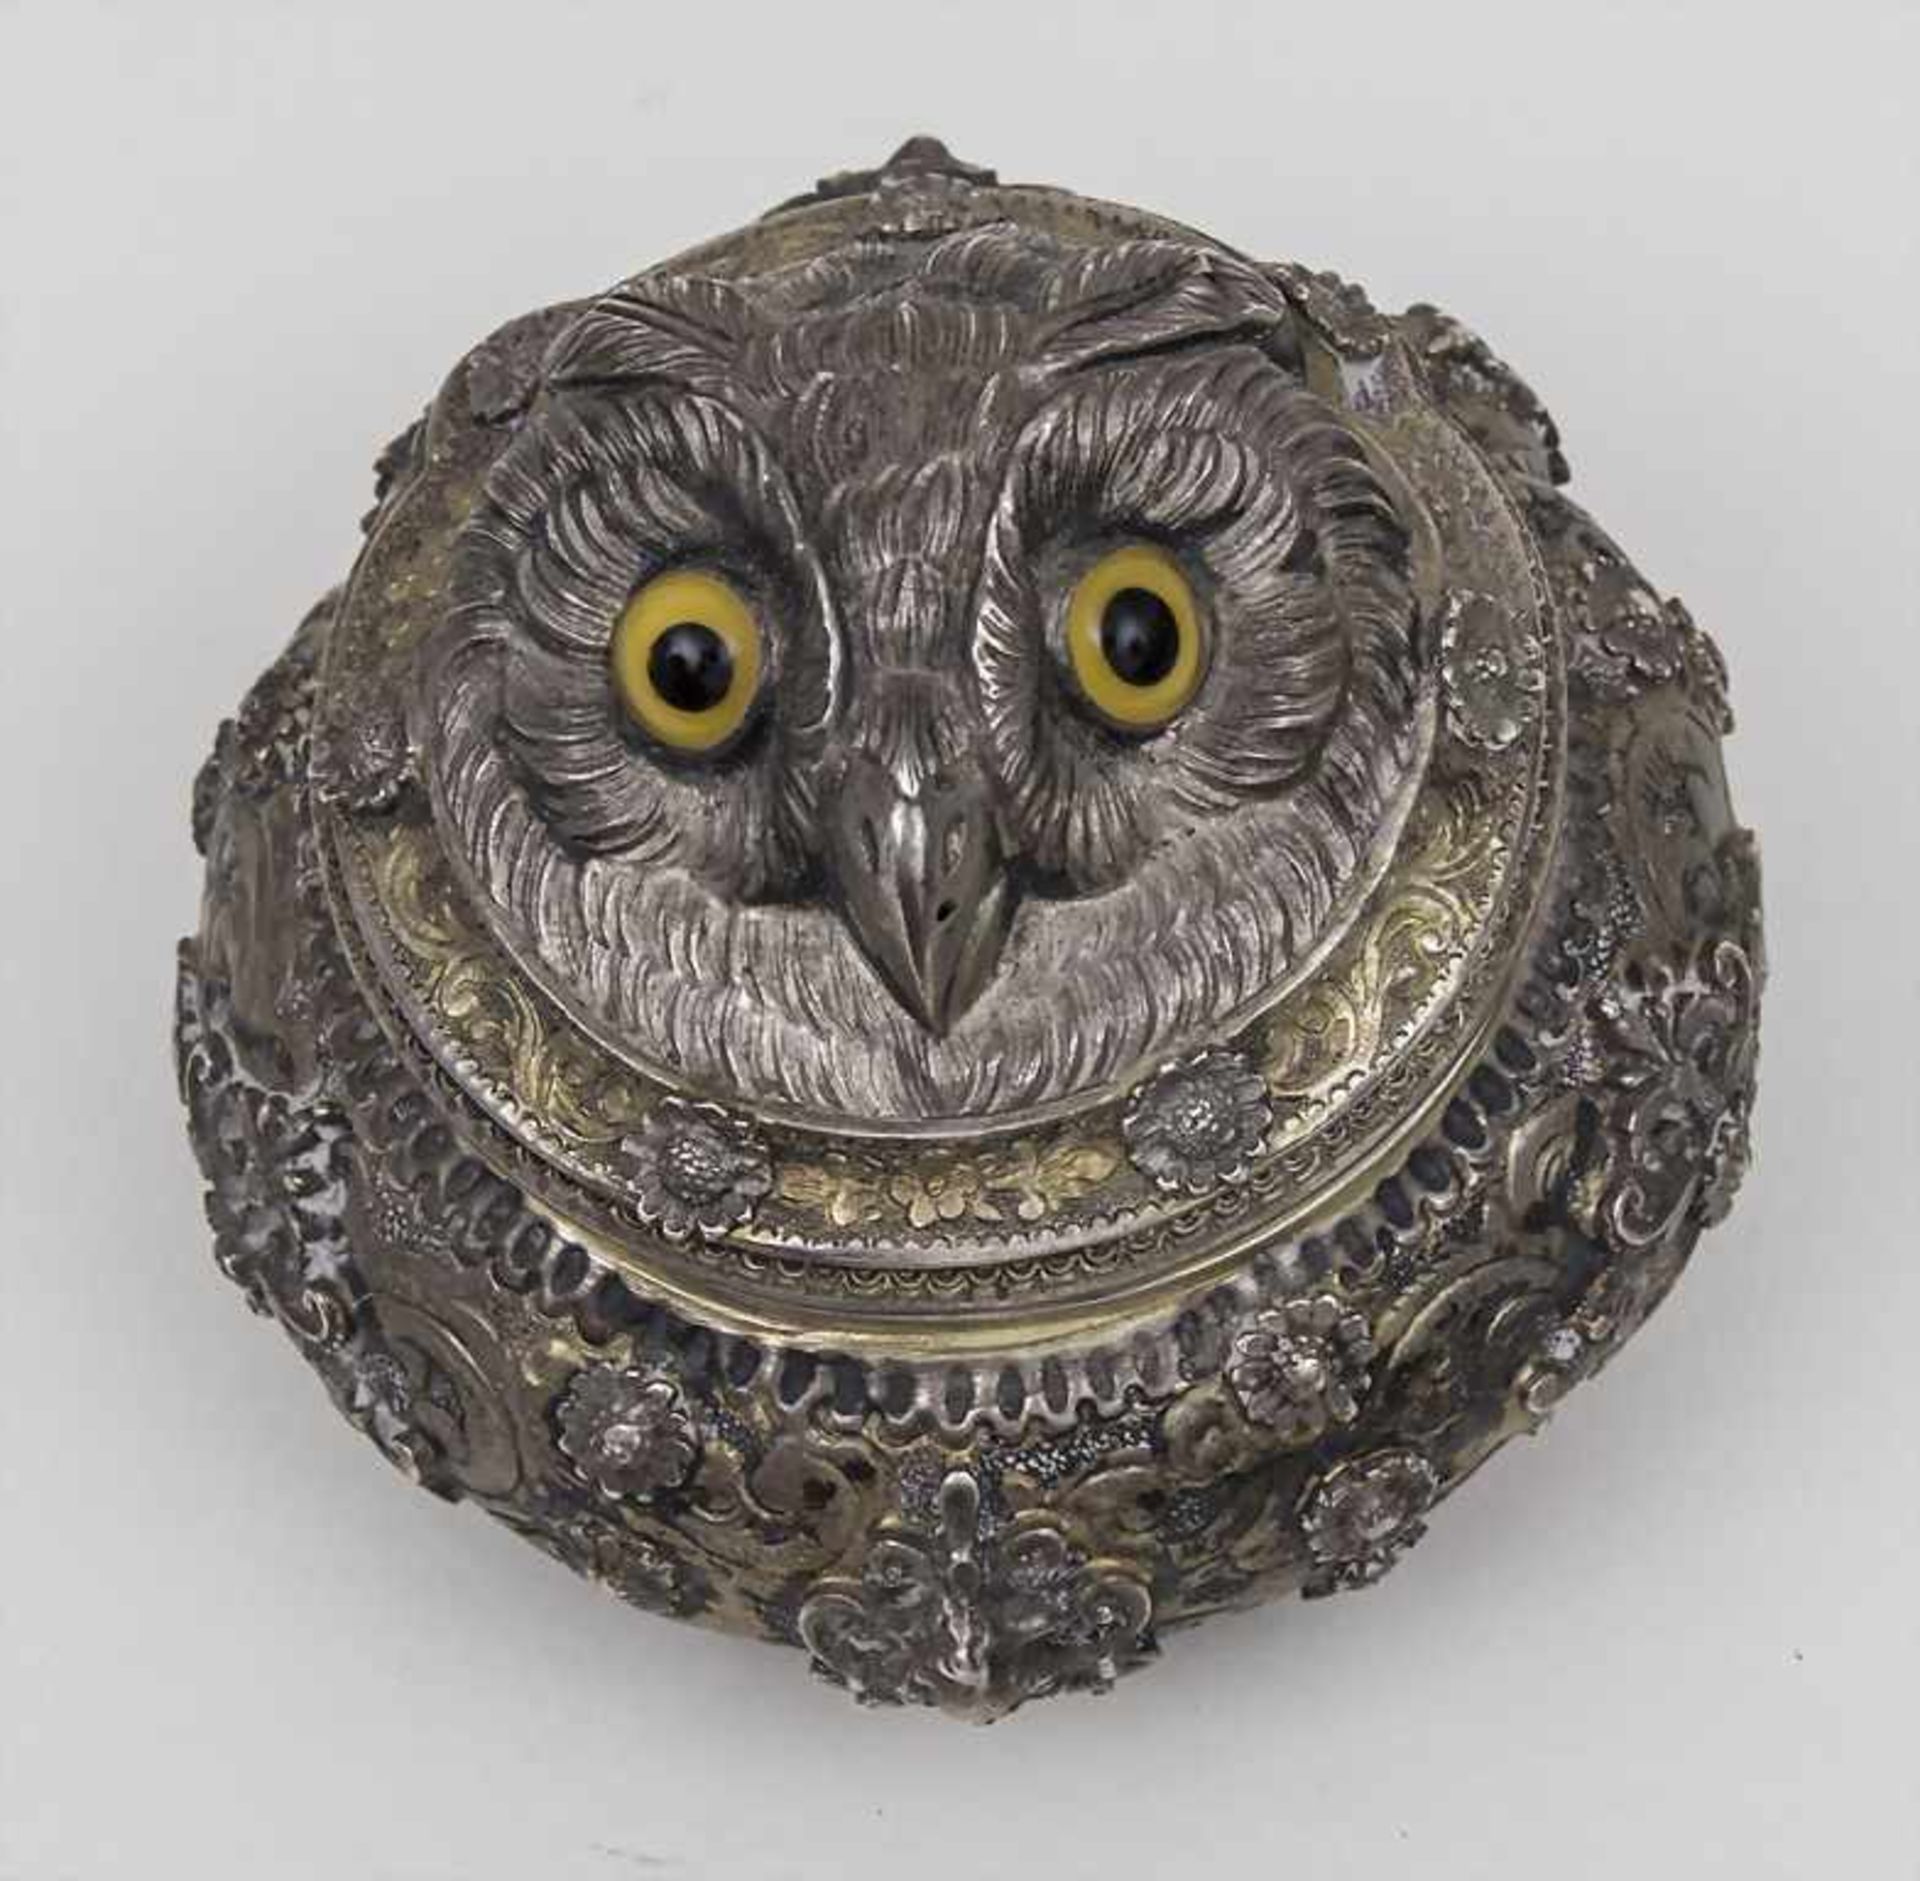 Zierdose mit Eulenkopf / A decorative lidded box with owl head, 19. Jh. Material: Silber, innen - Image 2 of 2